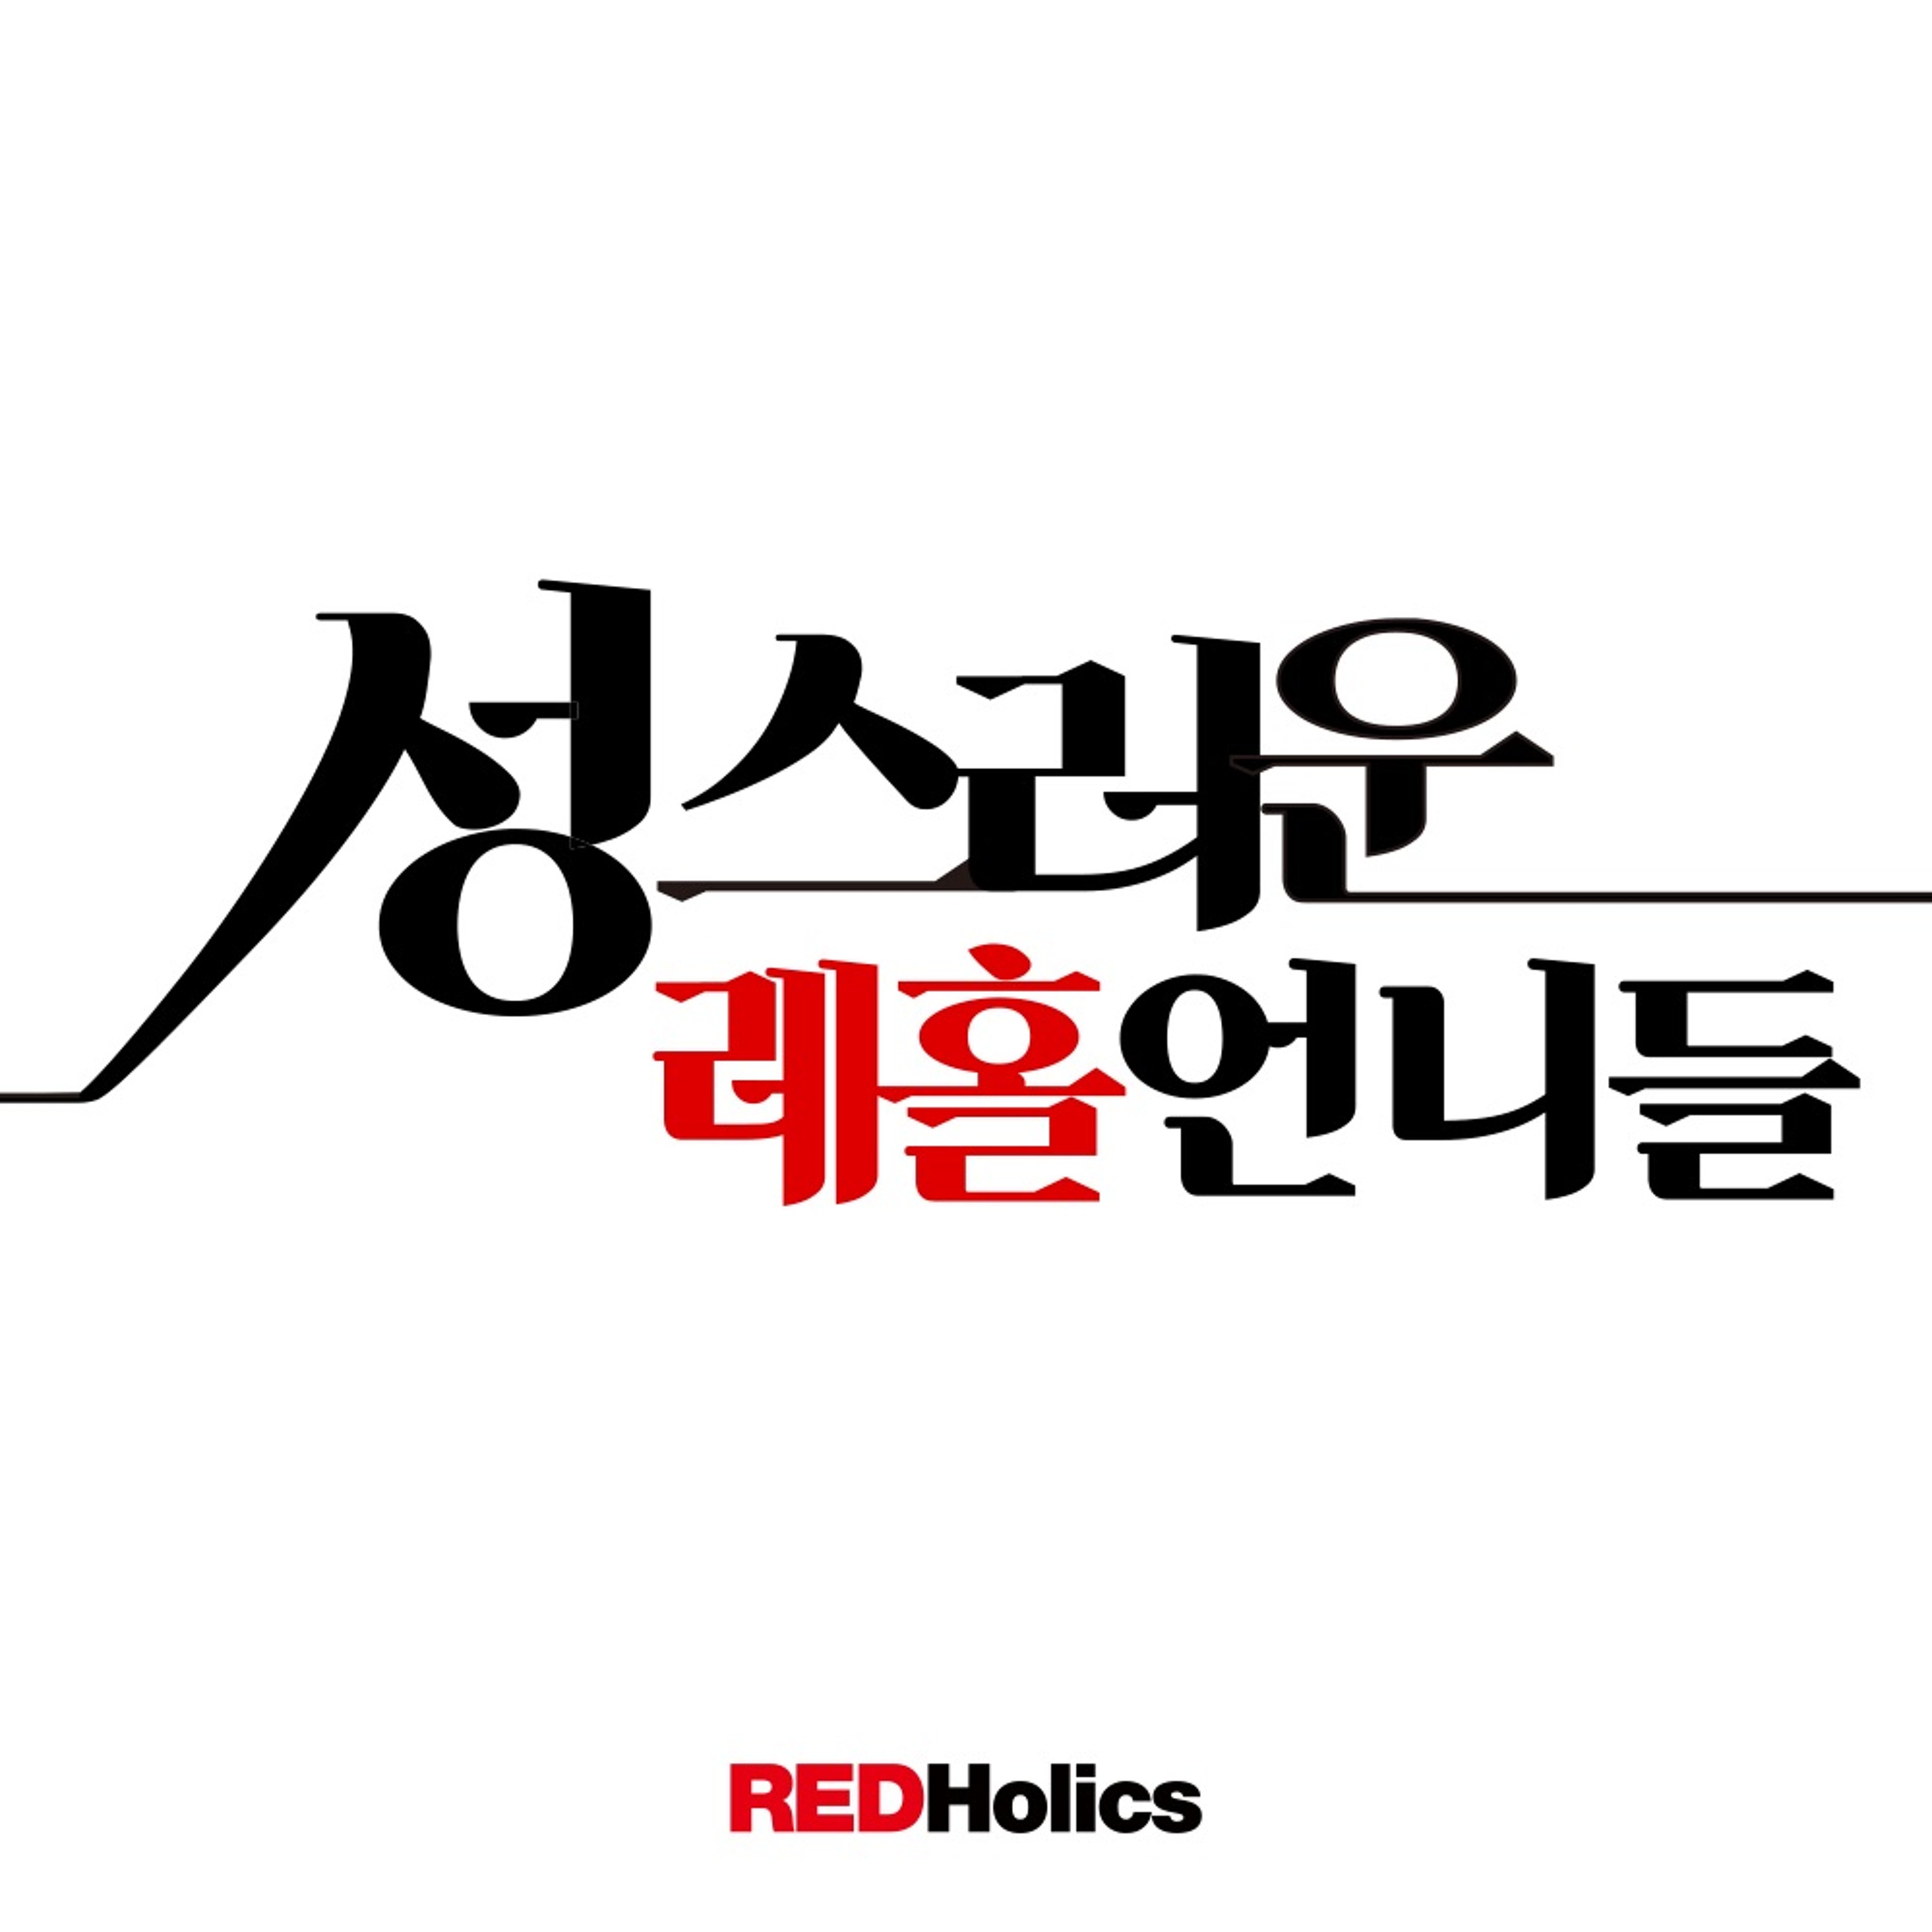 Best 레드홀릭스(Redholics) Podcasts | Most Downloaded Episodes